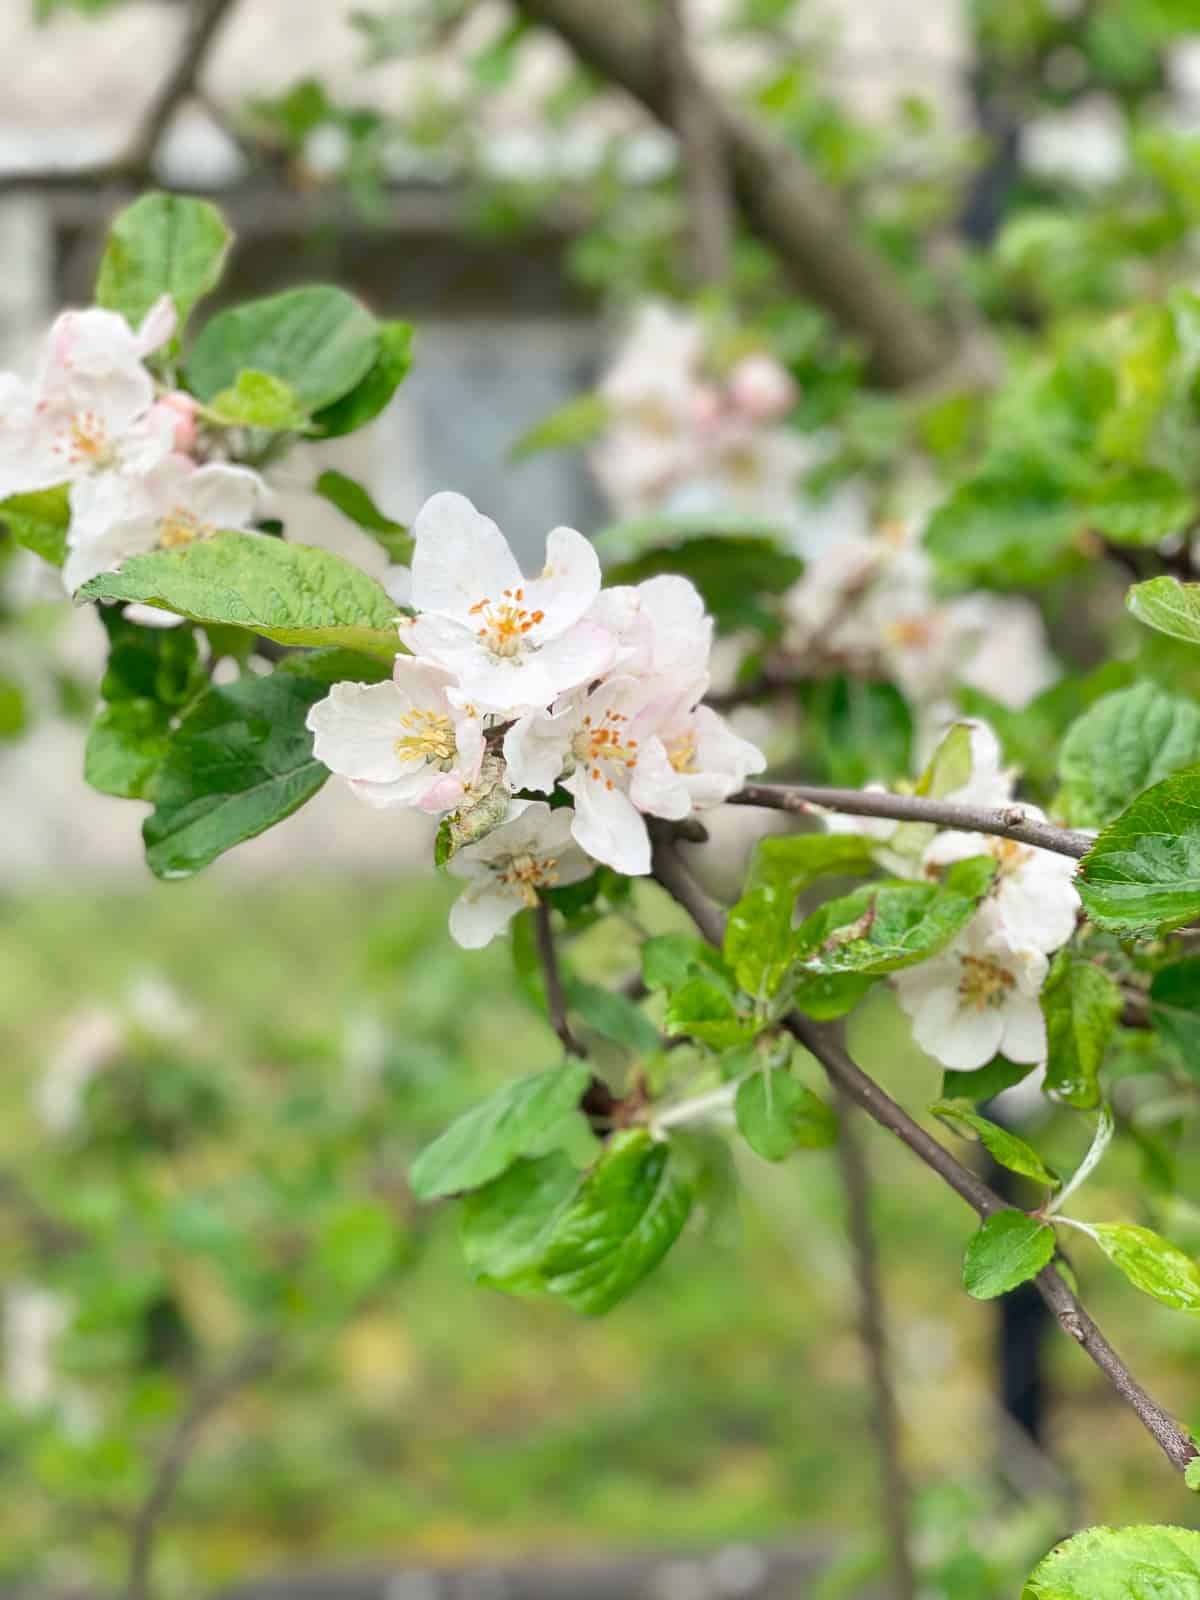 apple blossoms on a tree